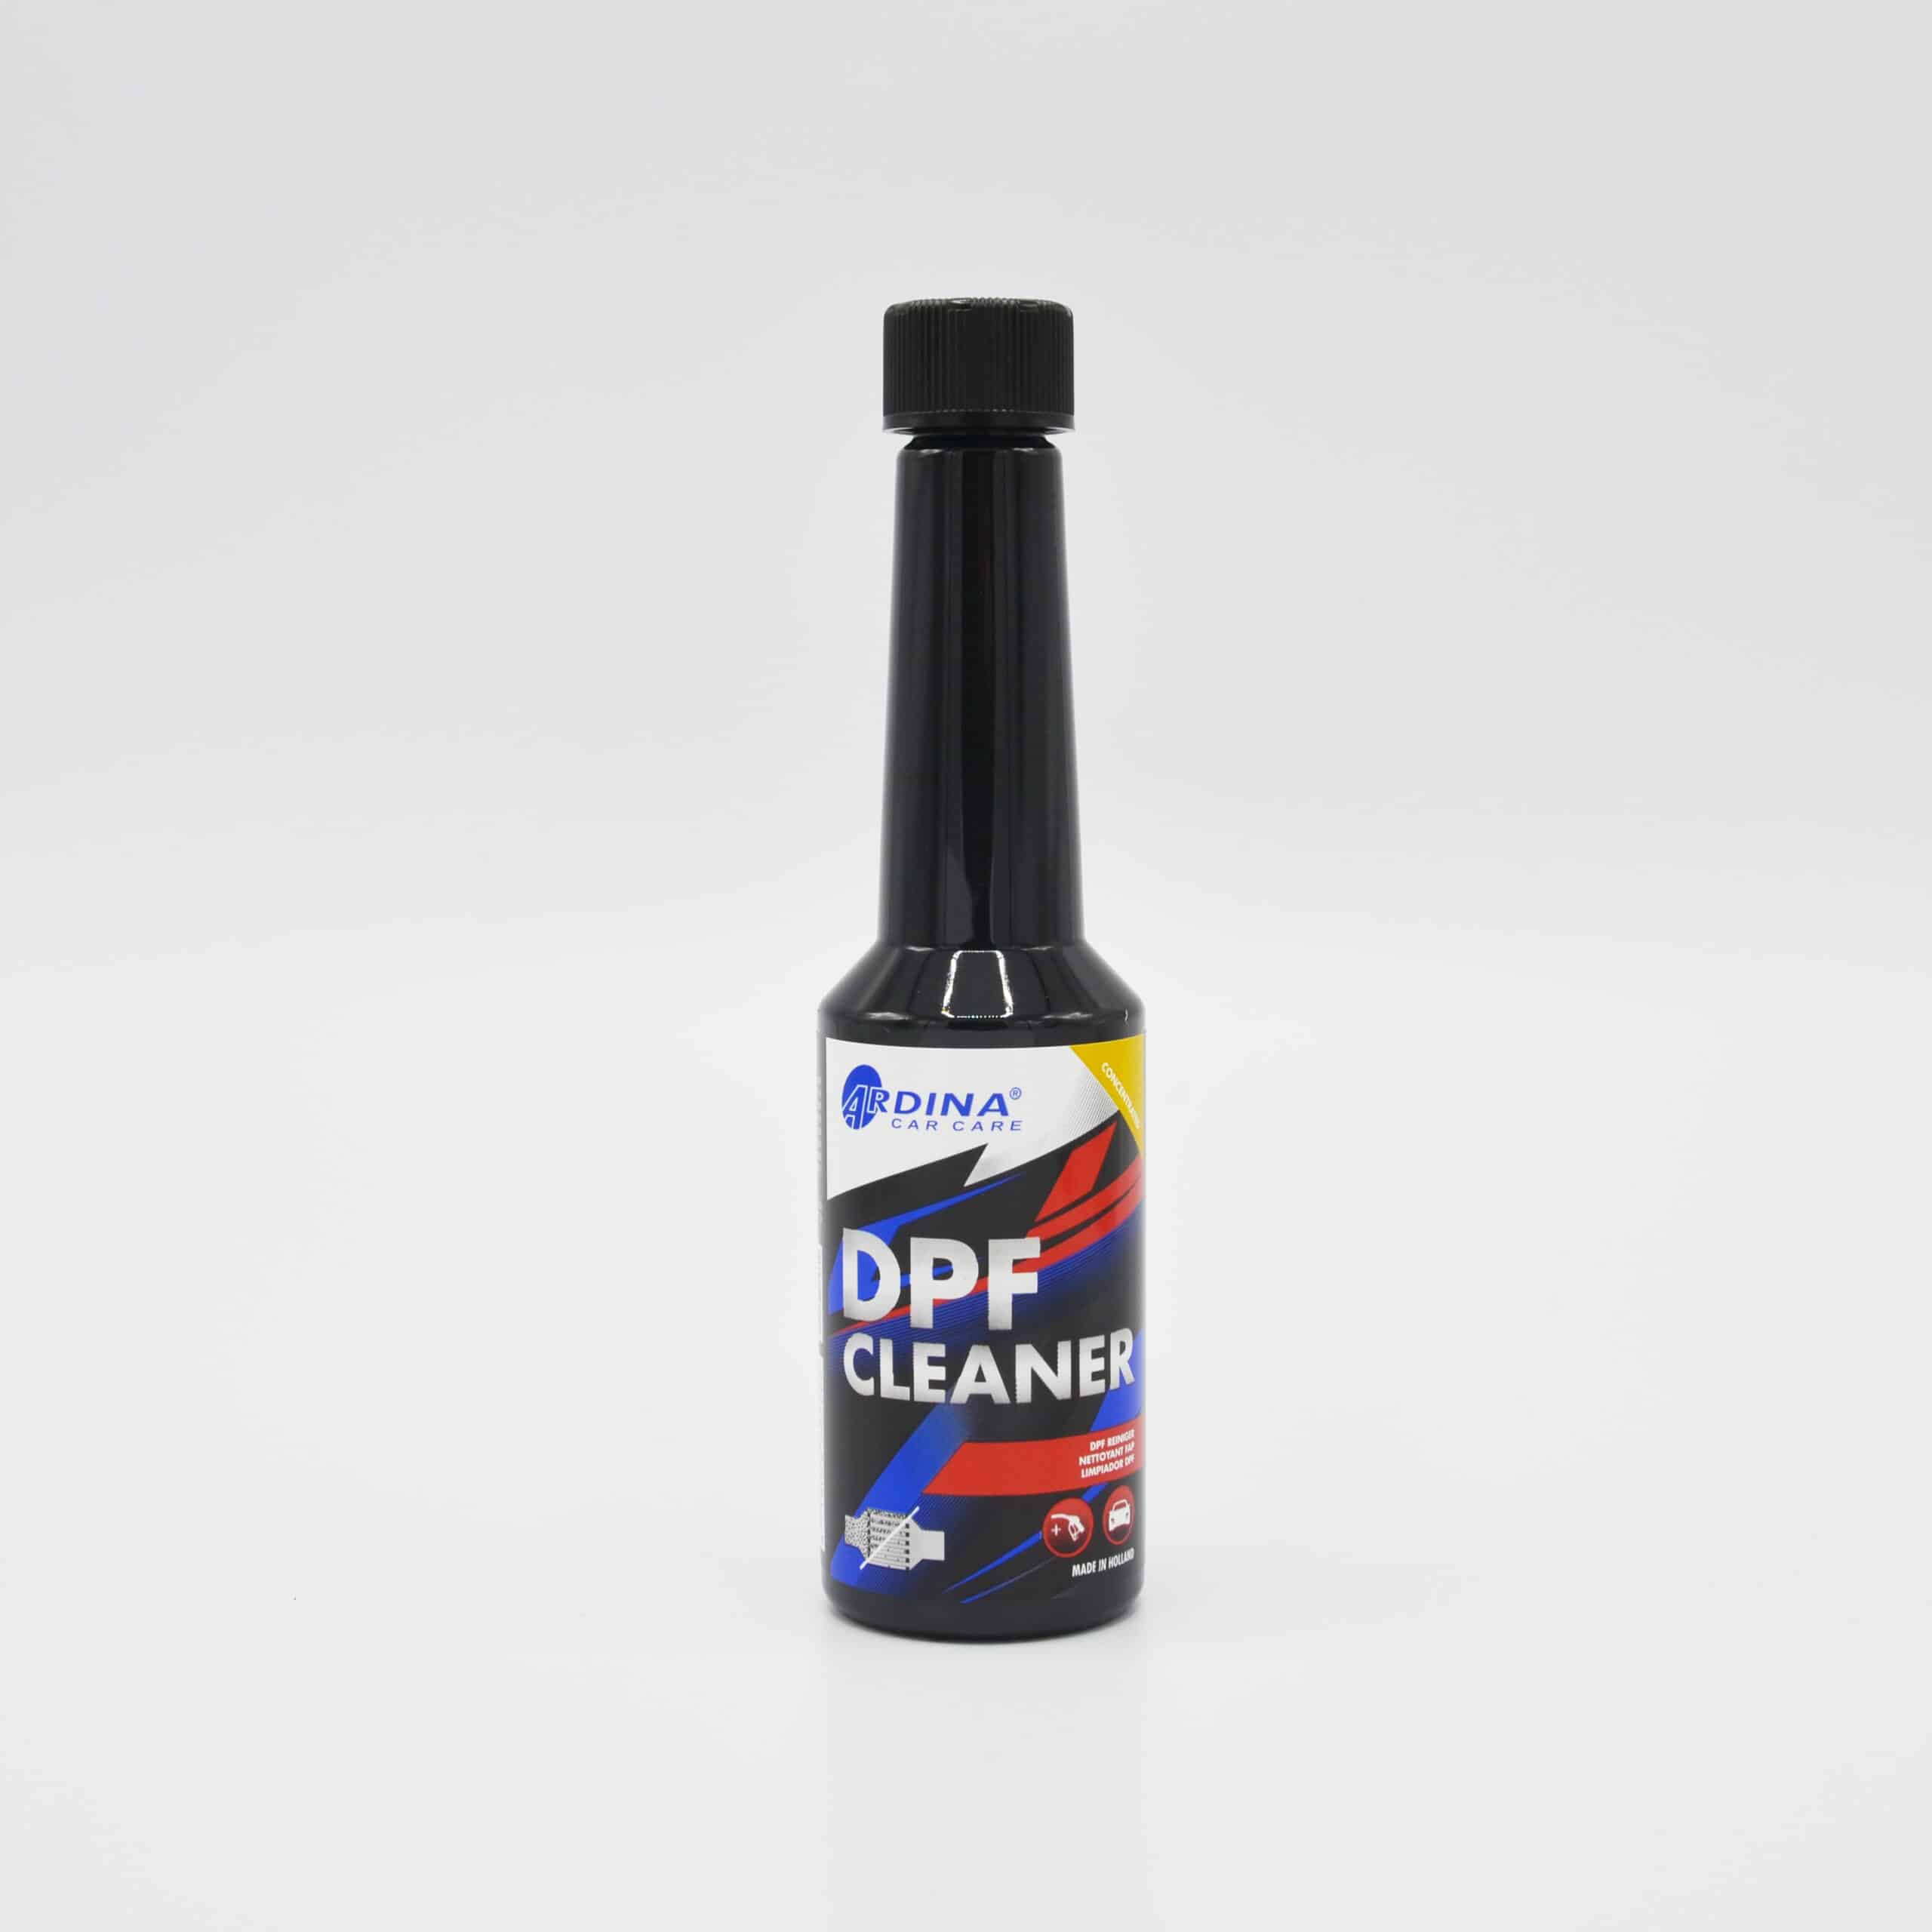 DPF Cleaner lowers the ignition temperature of accumulated soot which speeds up the dpf regeneration process.